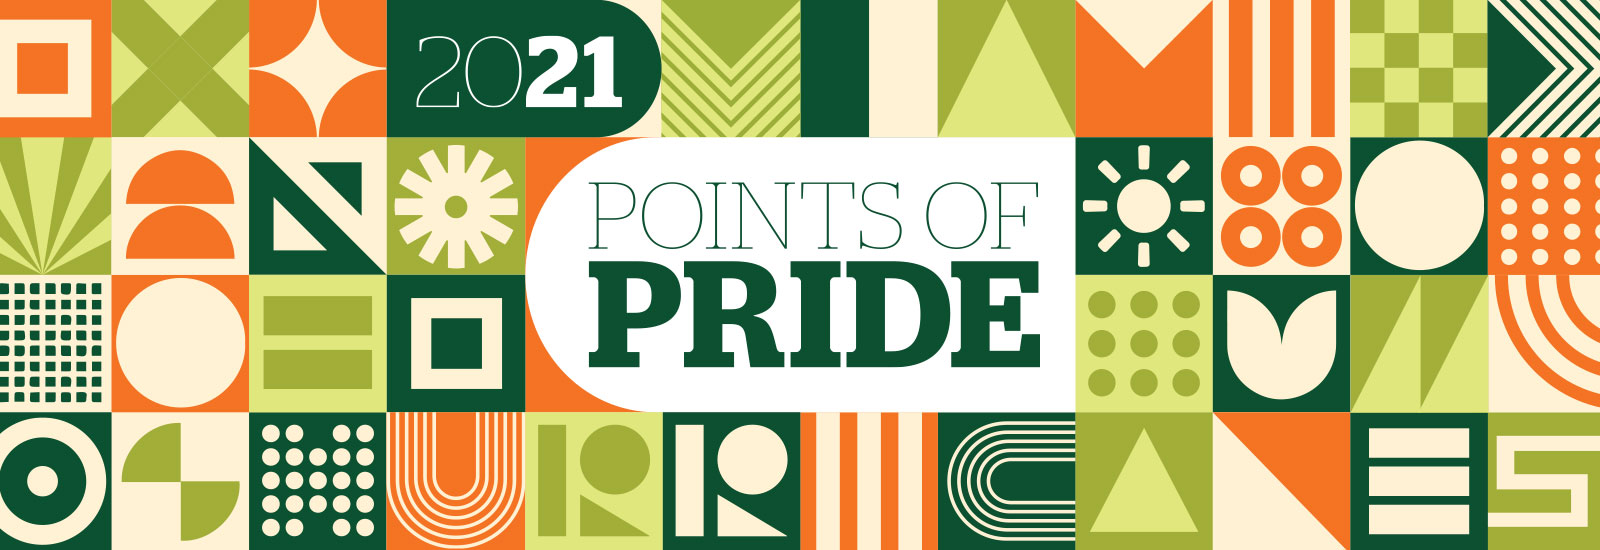 2021 Points of Pride